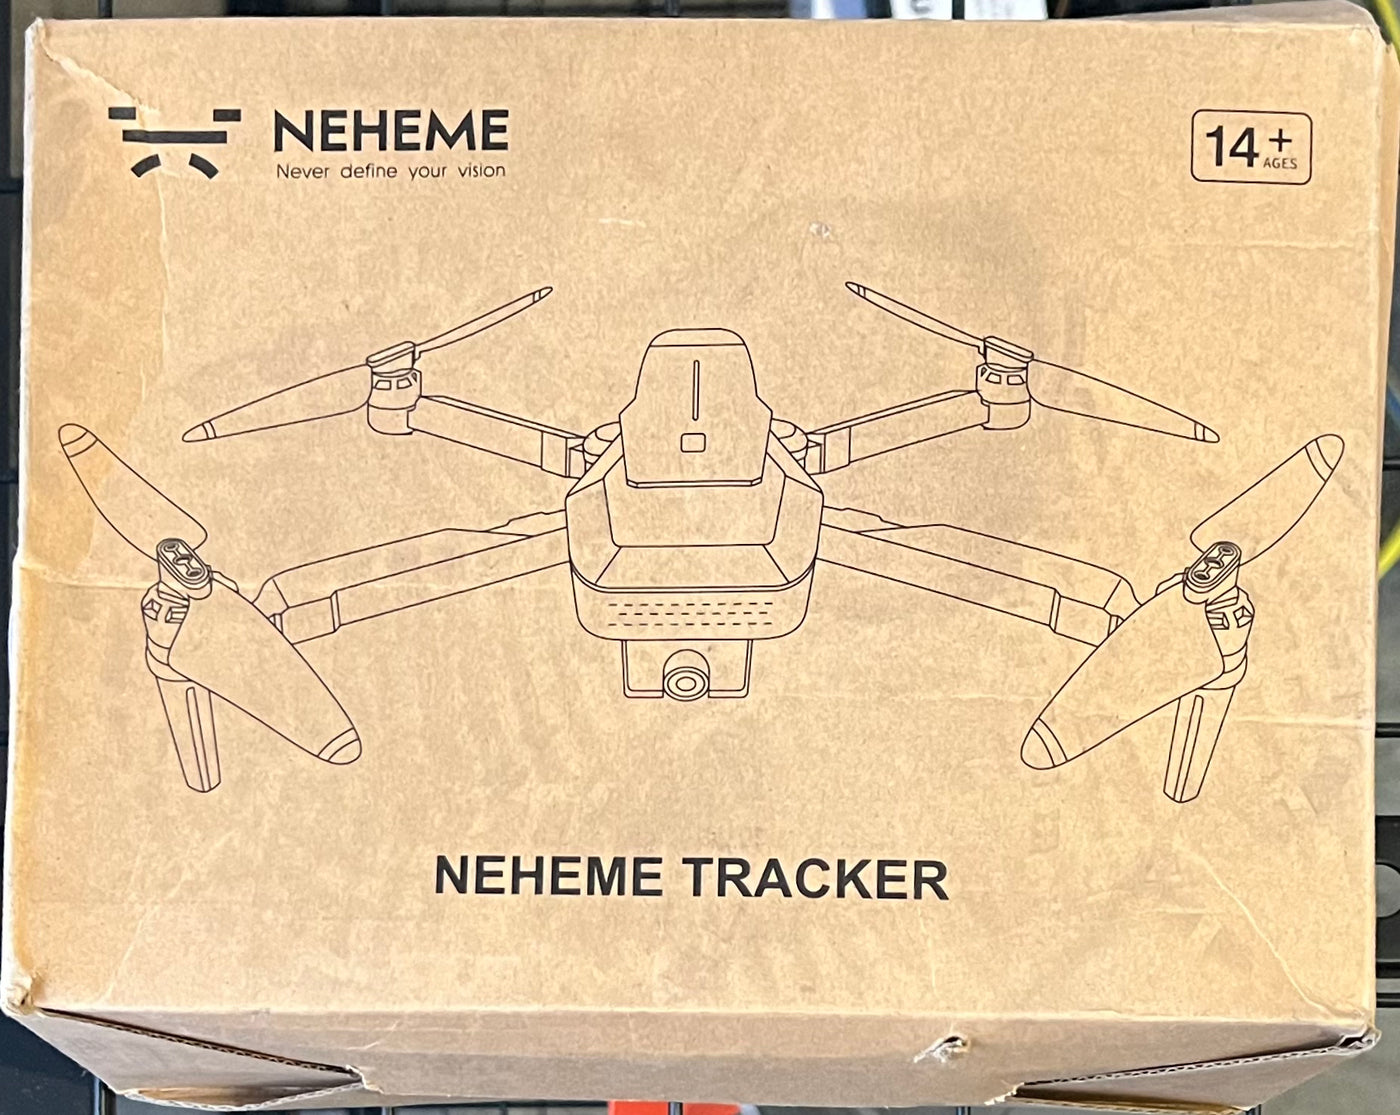  NEHEME NH760 Drones with 1080P HD Camera for Adults, WIFI FPV  Live Video, Foldable Drones for Kids Beginners, Headless Mode, Altitude  Hold, RC Quadcopter Toys Gifts with 2 Batteries, Carrying Case 